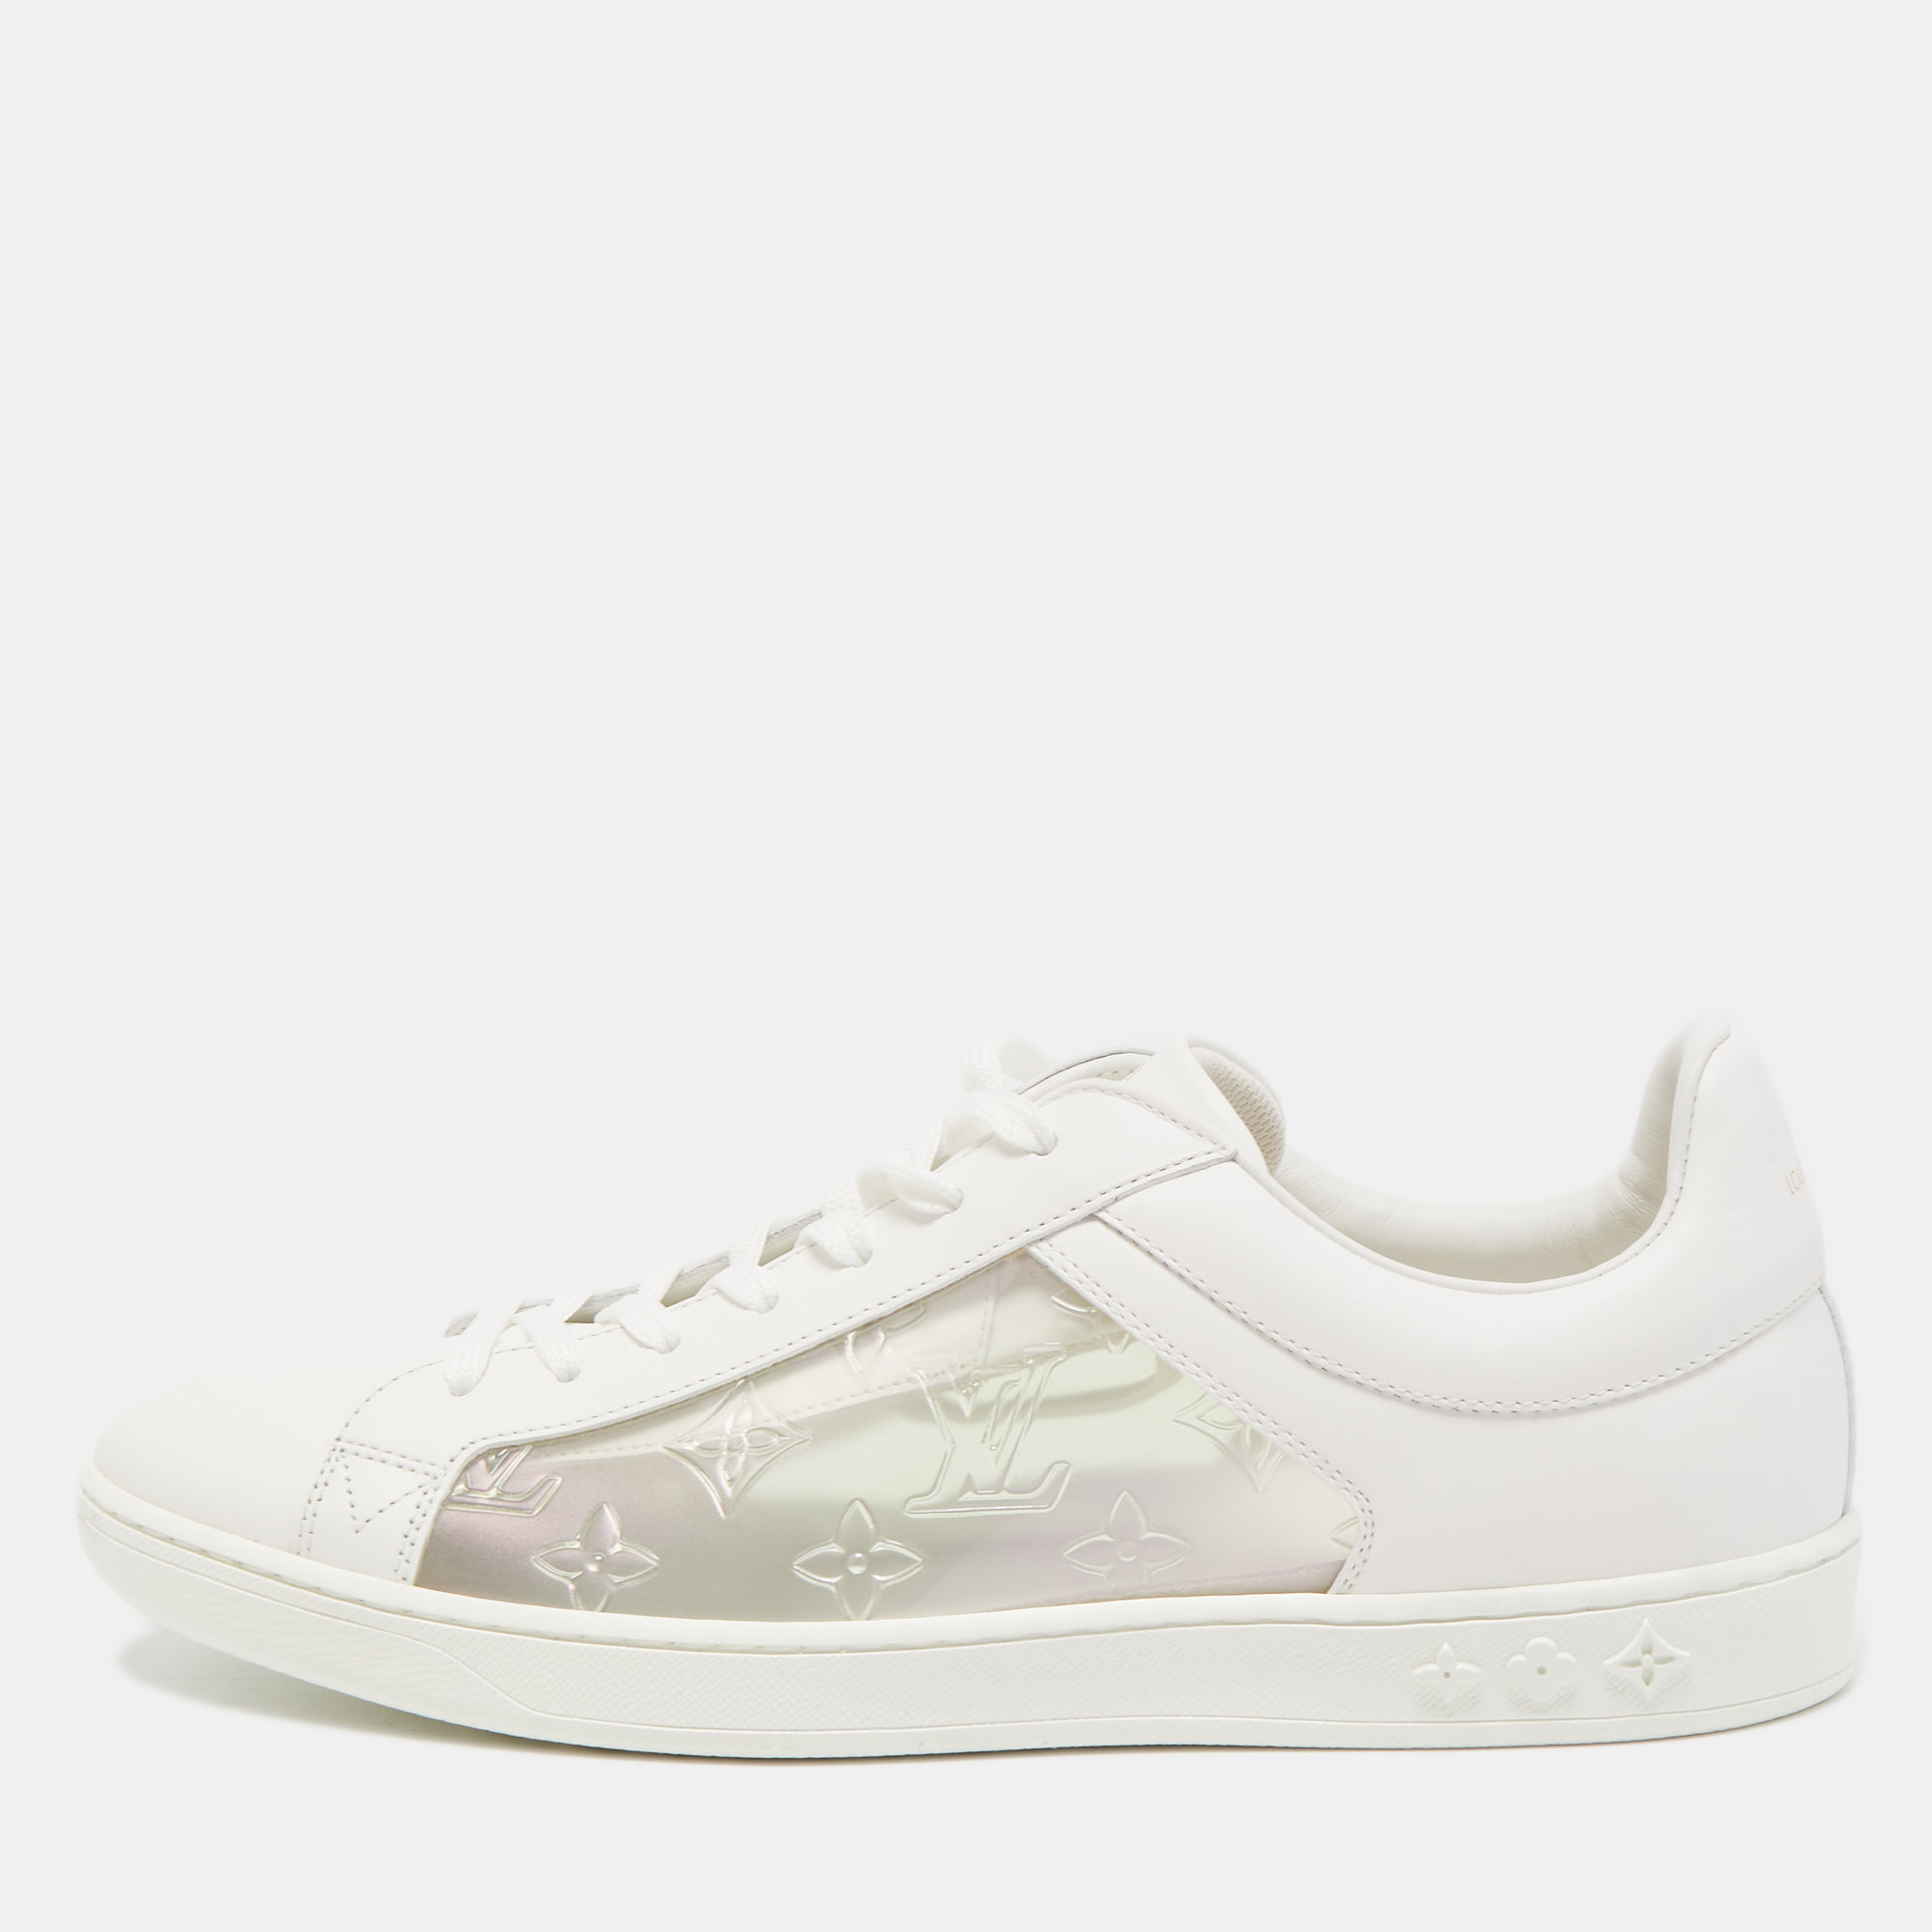 Louis Vuitton Monogram Leather Low Top Sneakers